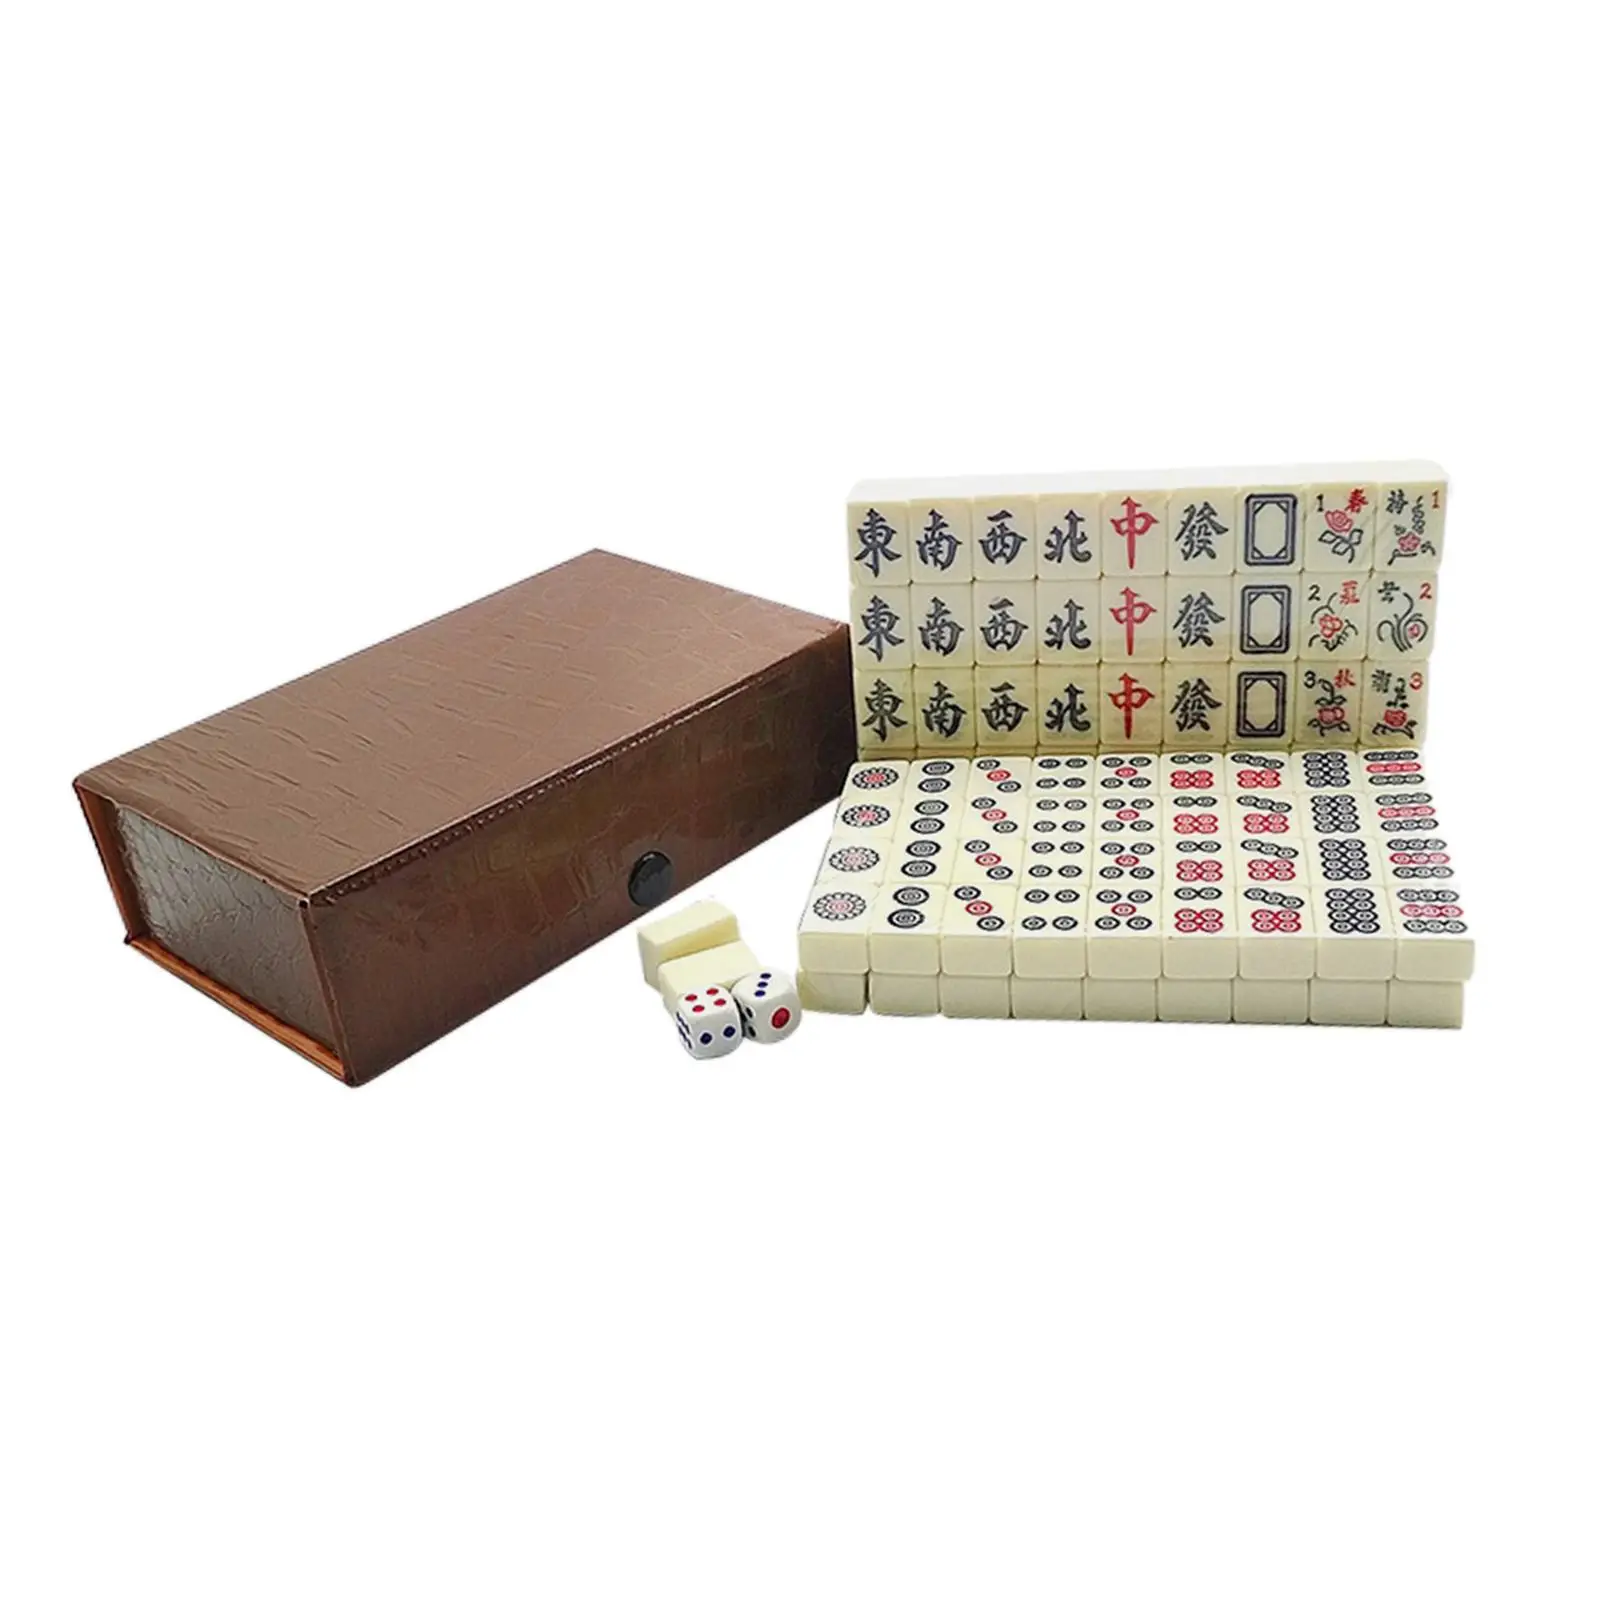 Mini Chinese Mahjong Game Set with Carrying Travel Case classic tiles Games Travel Mahjong Set for Travel Adults